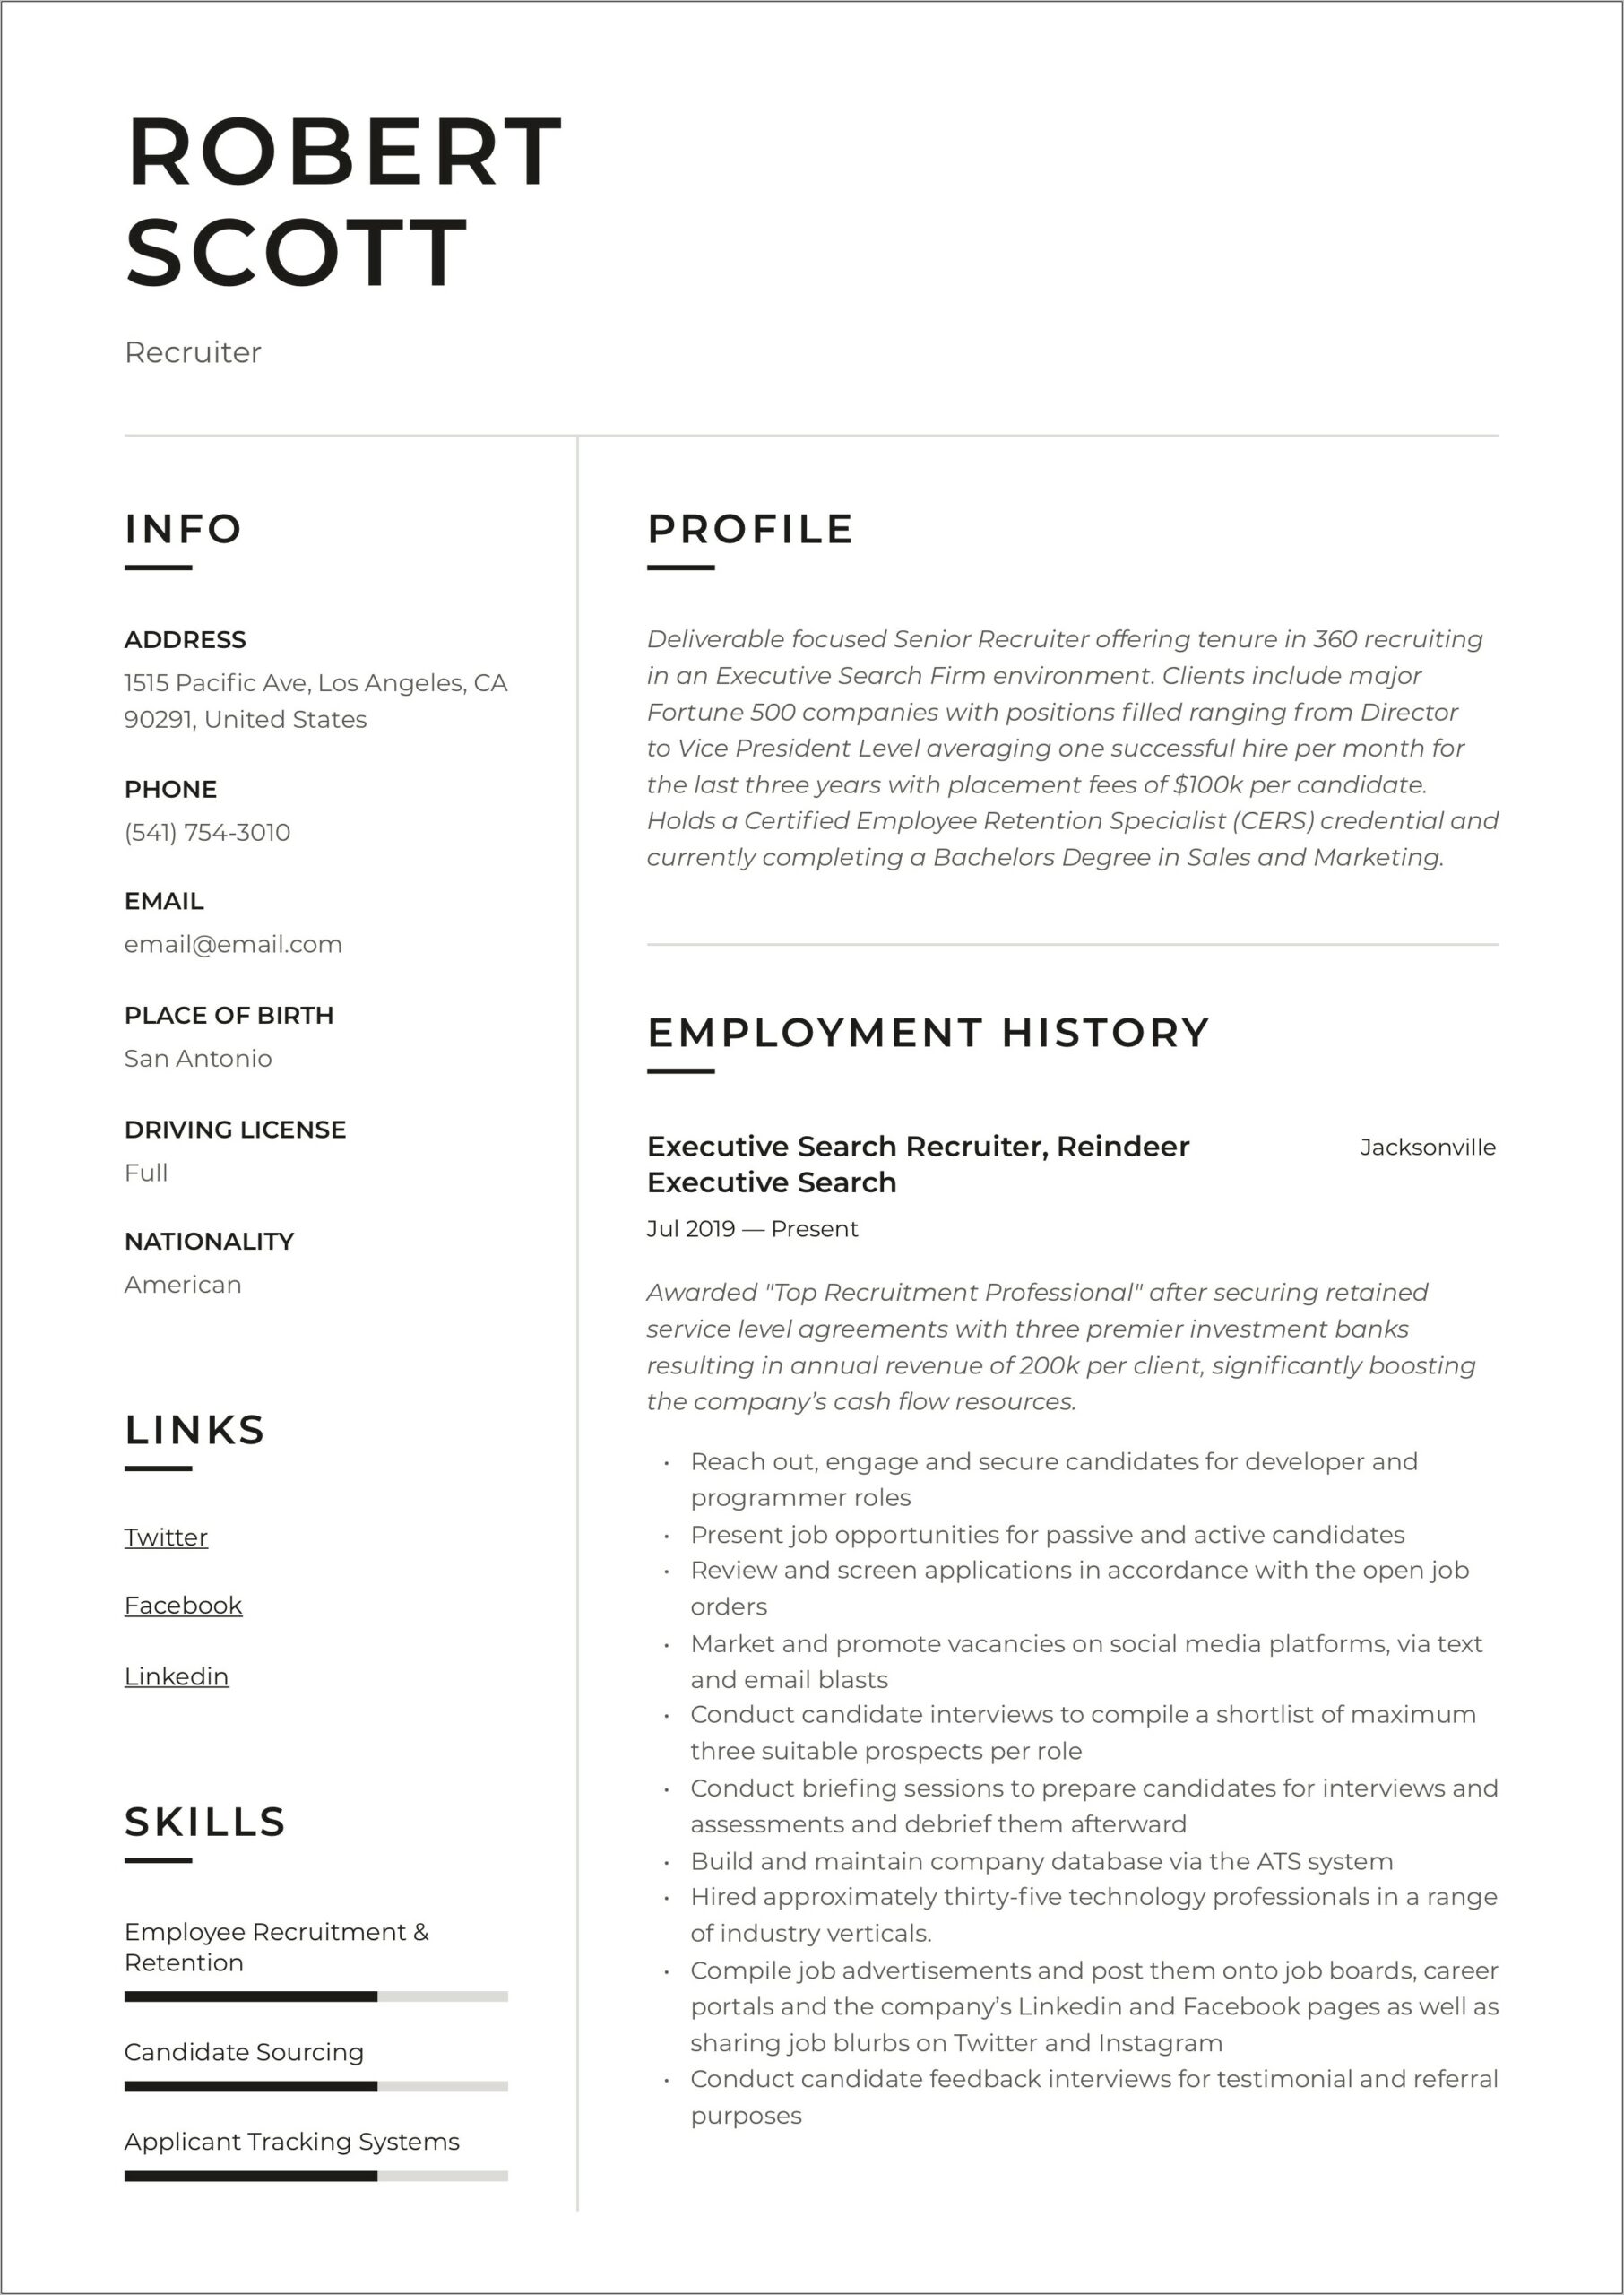 Email Template To Recruiter For Job With Resume